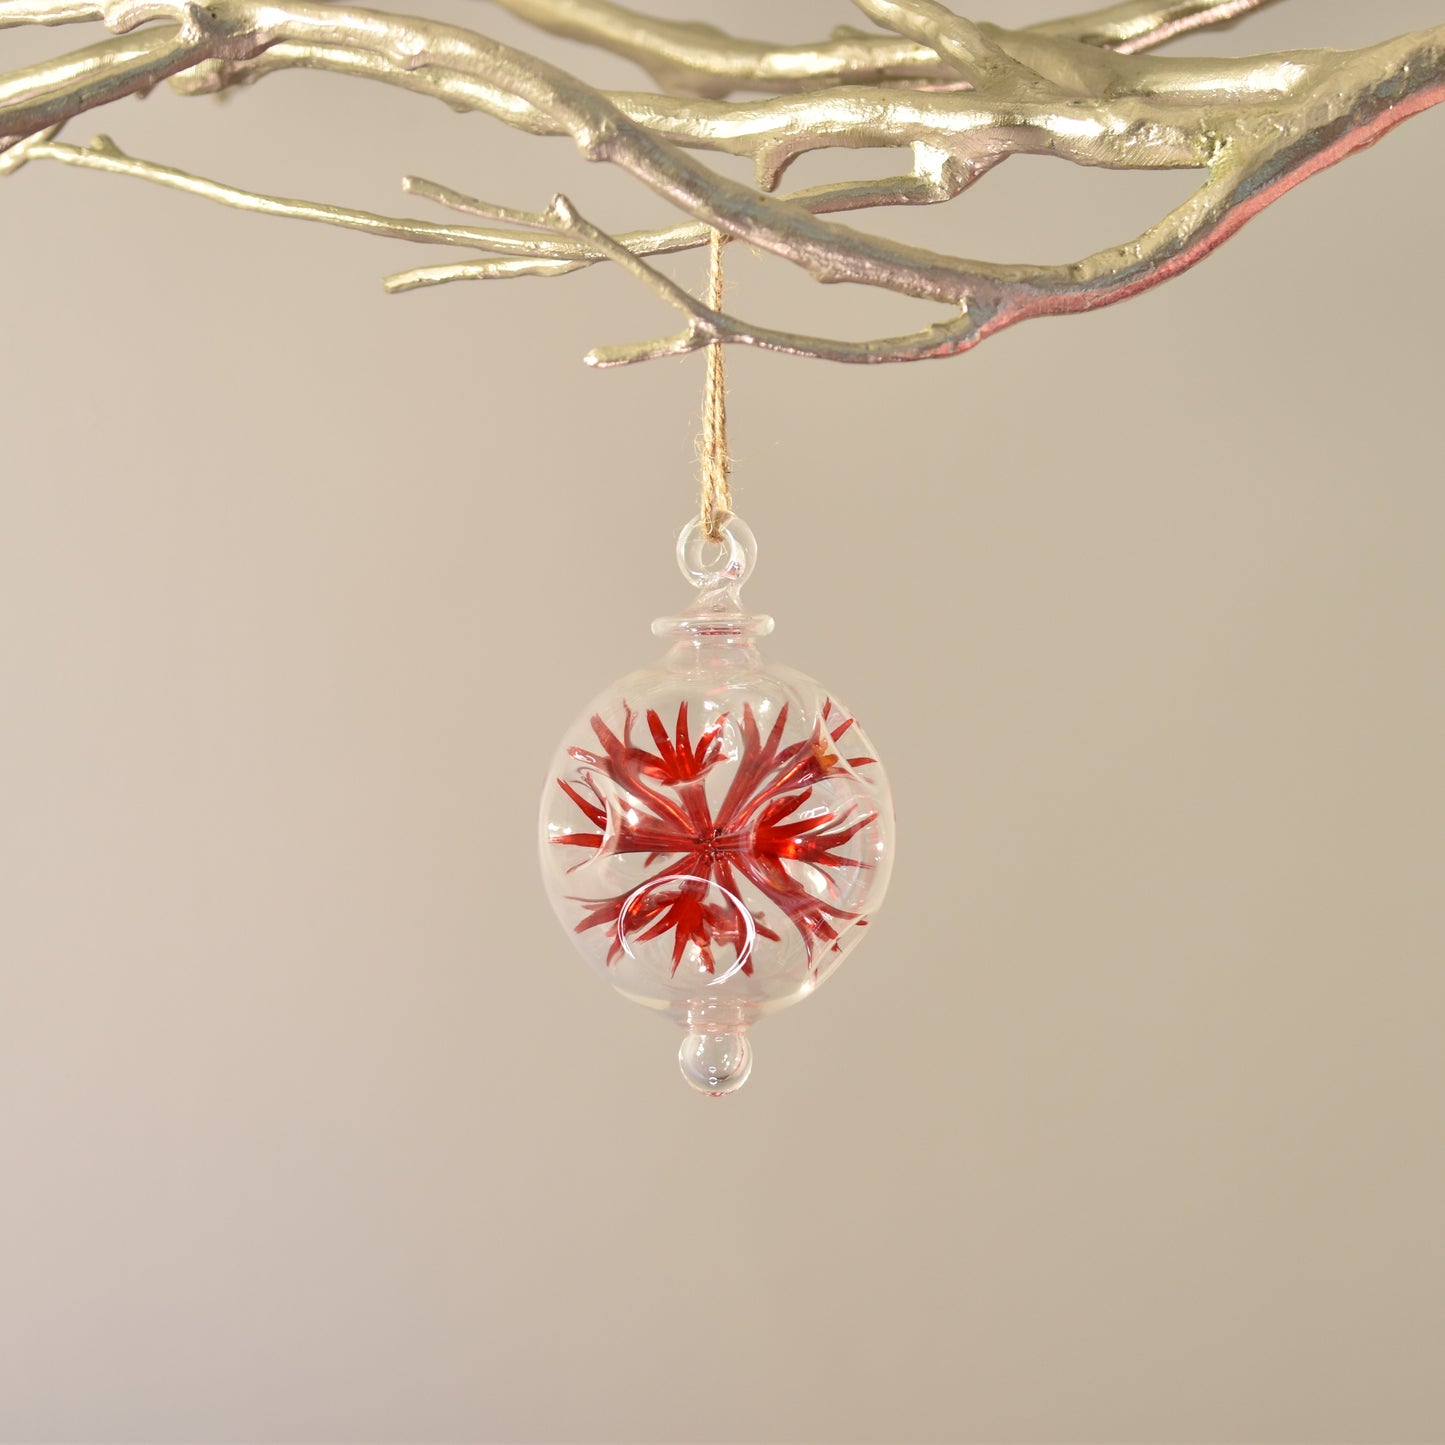 Retro Trumpets Handblown Glass Bauble - Red - Large